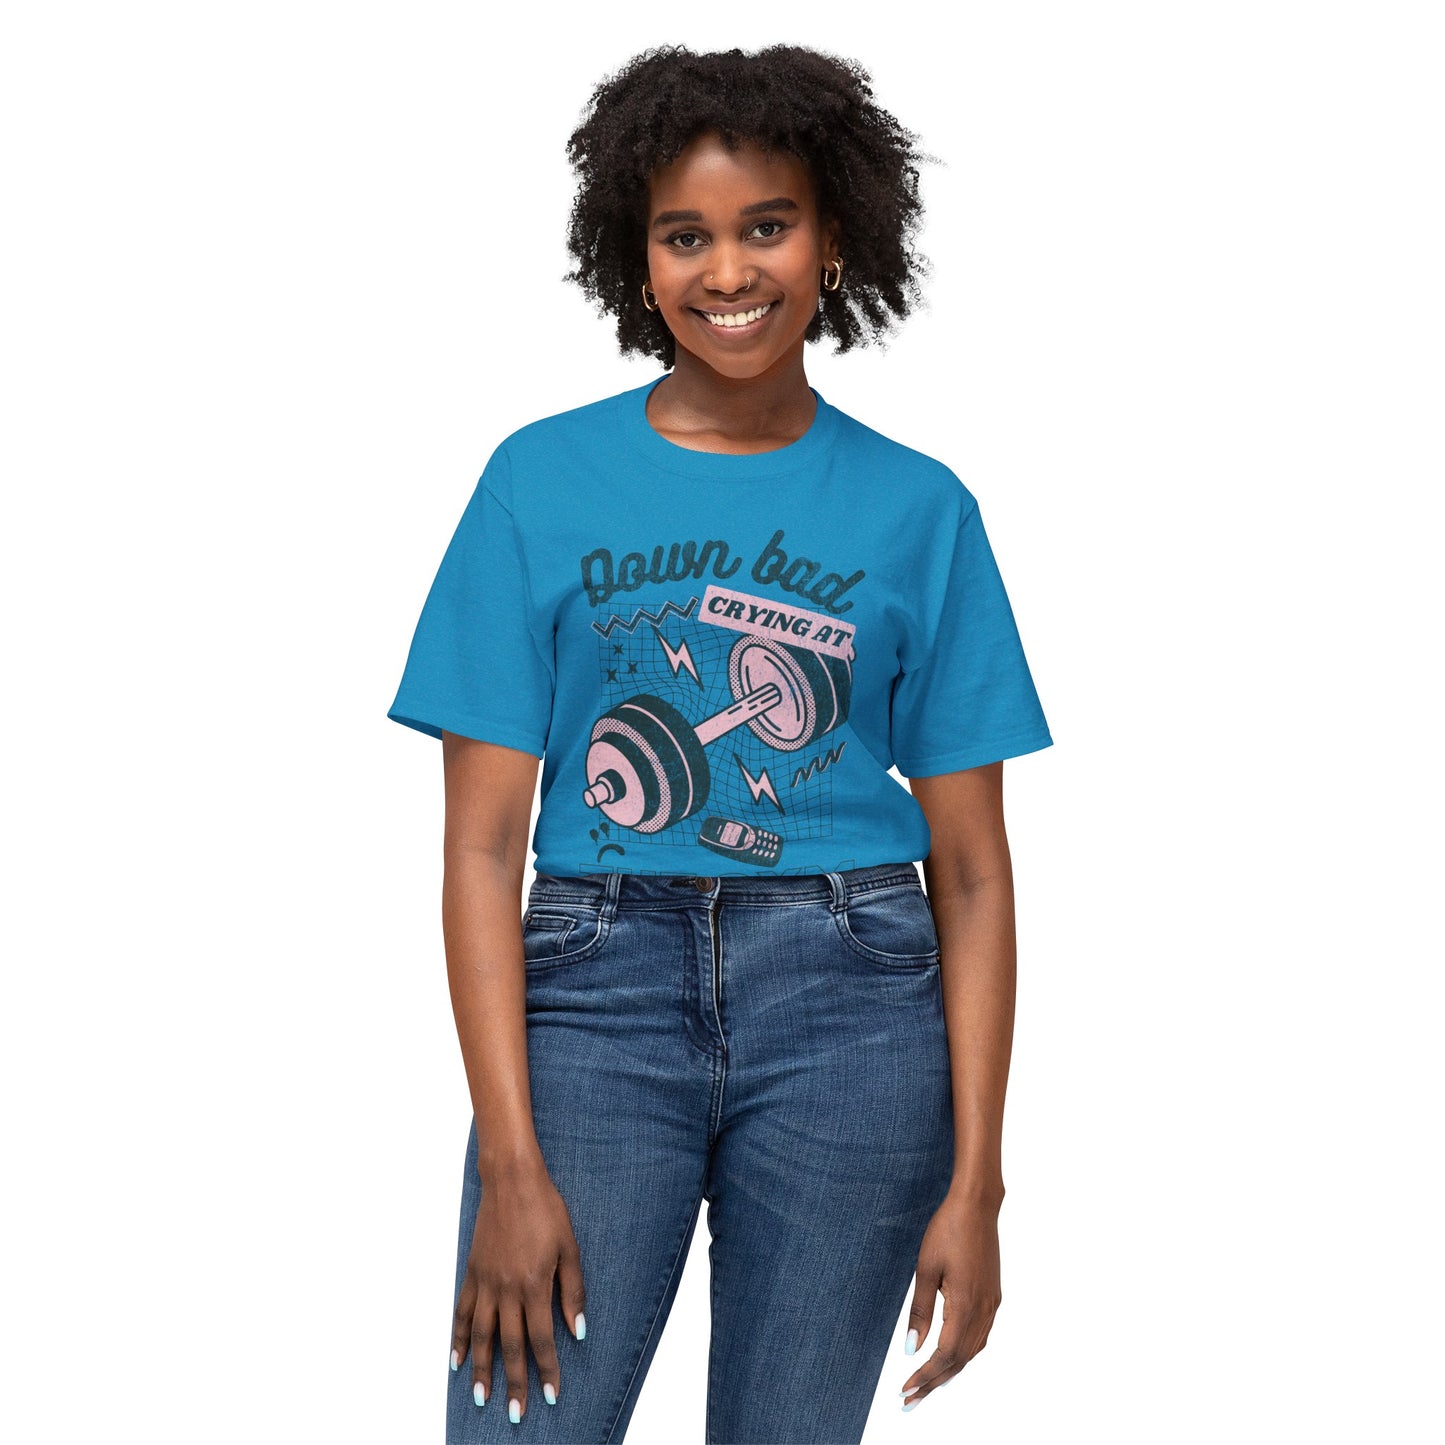 Down Bad T-shirt Turquoise Heather